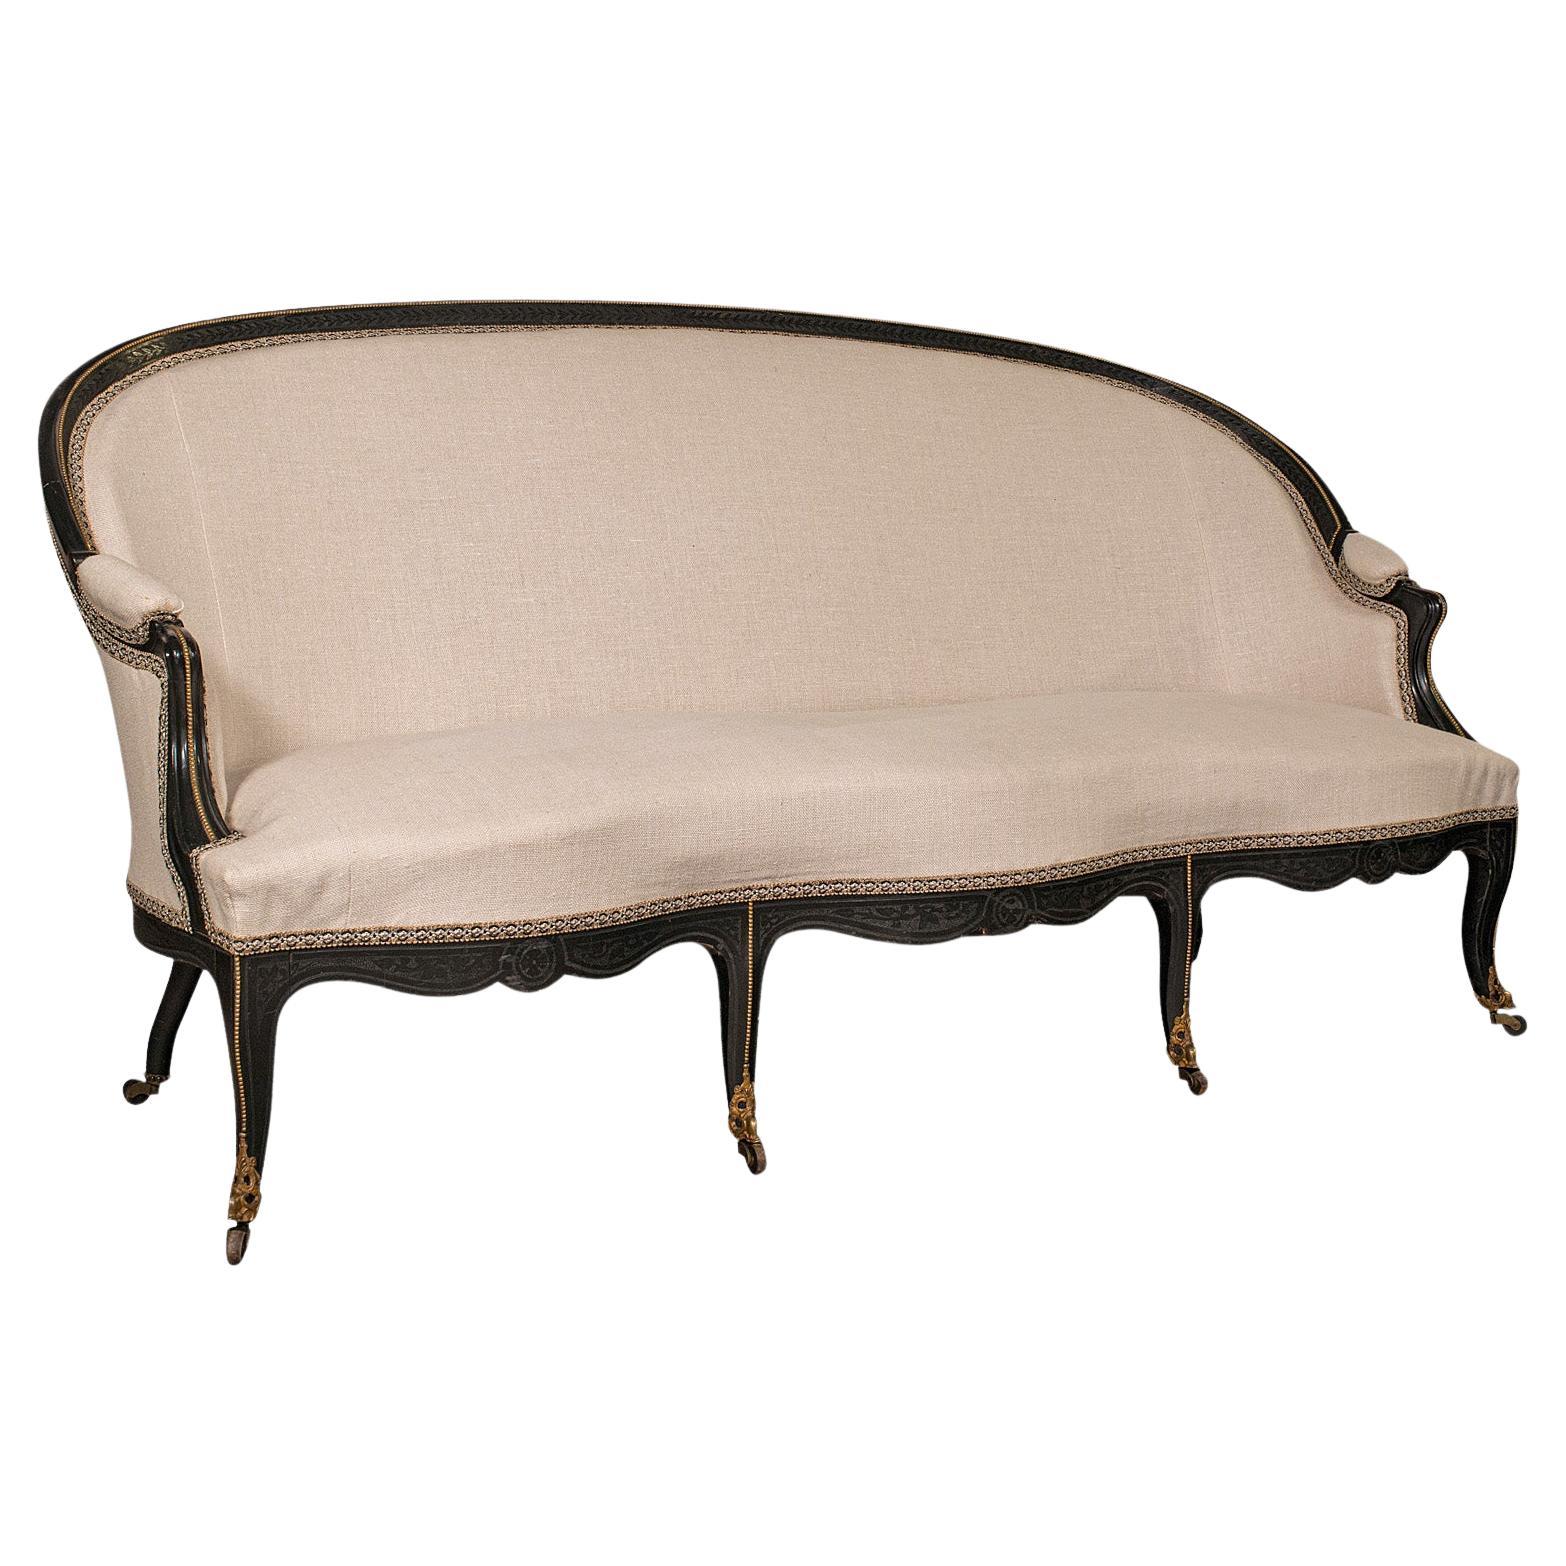 Antique Canape Sofa, Continental, Wing Settee, 3 Seat, Louis XV, Victorian, 1870 For Sale